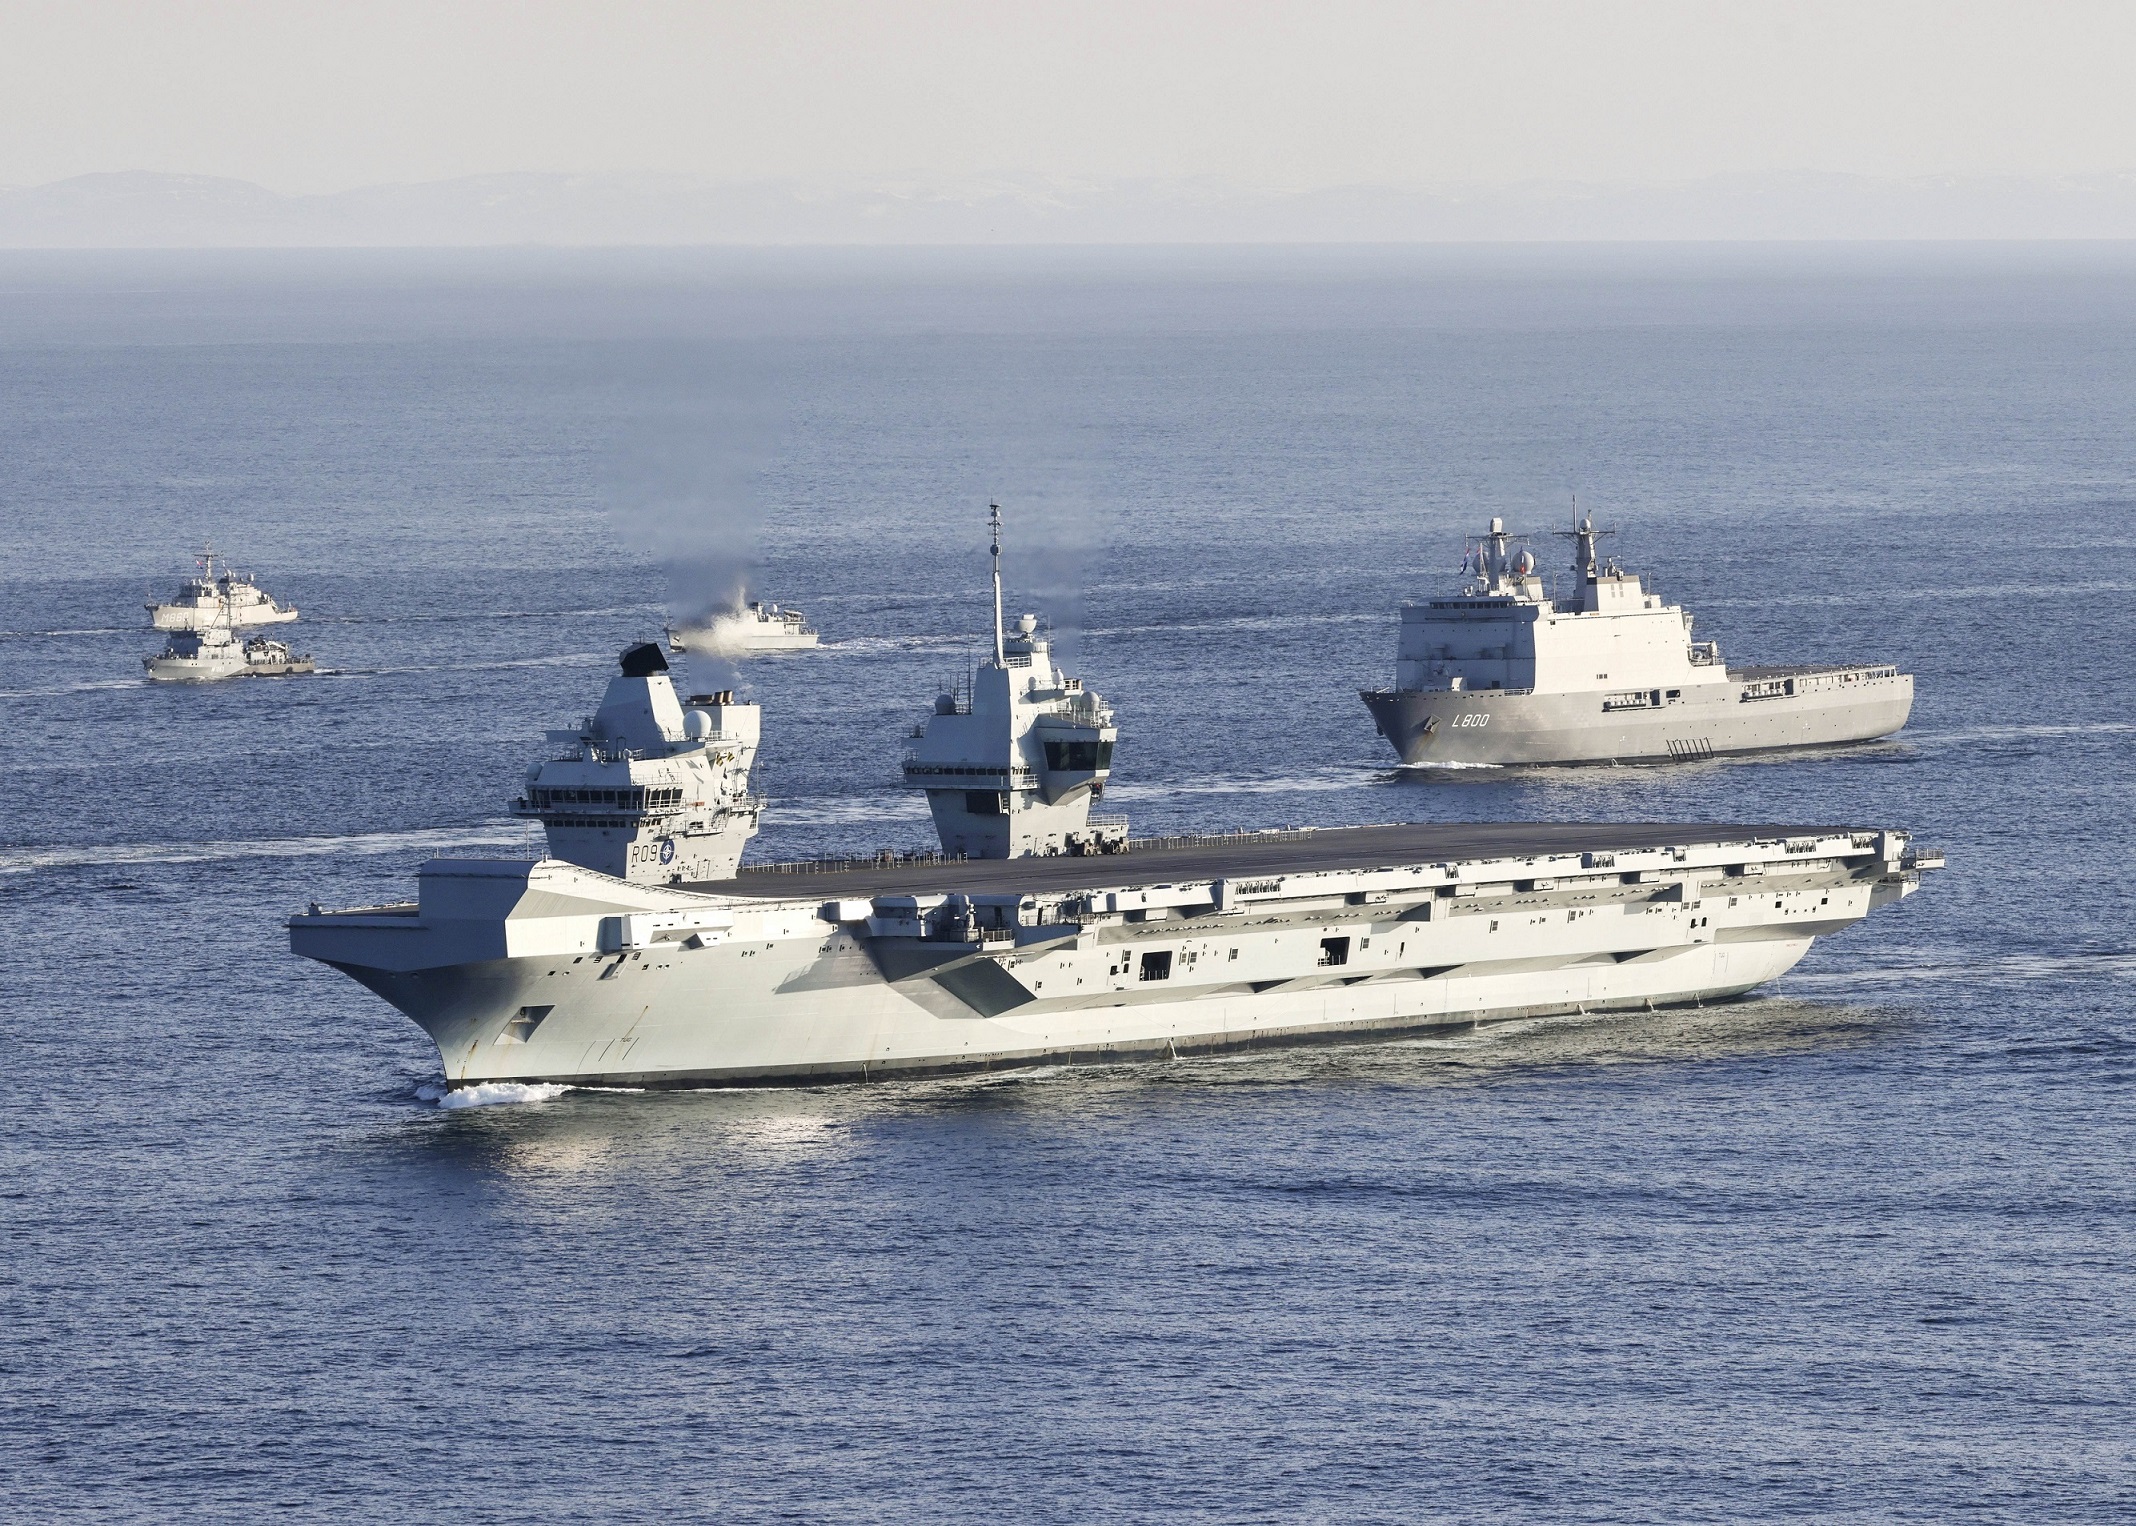 HMS Prince of Wales has taken its place at the centre of one of the most powerful naval task forces in the world.